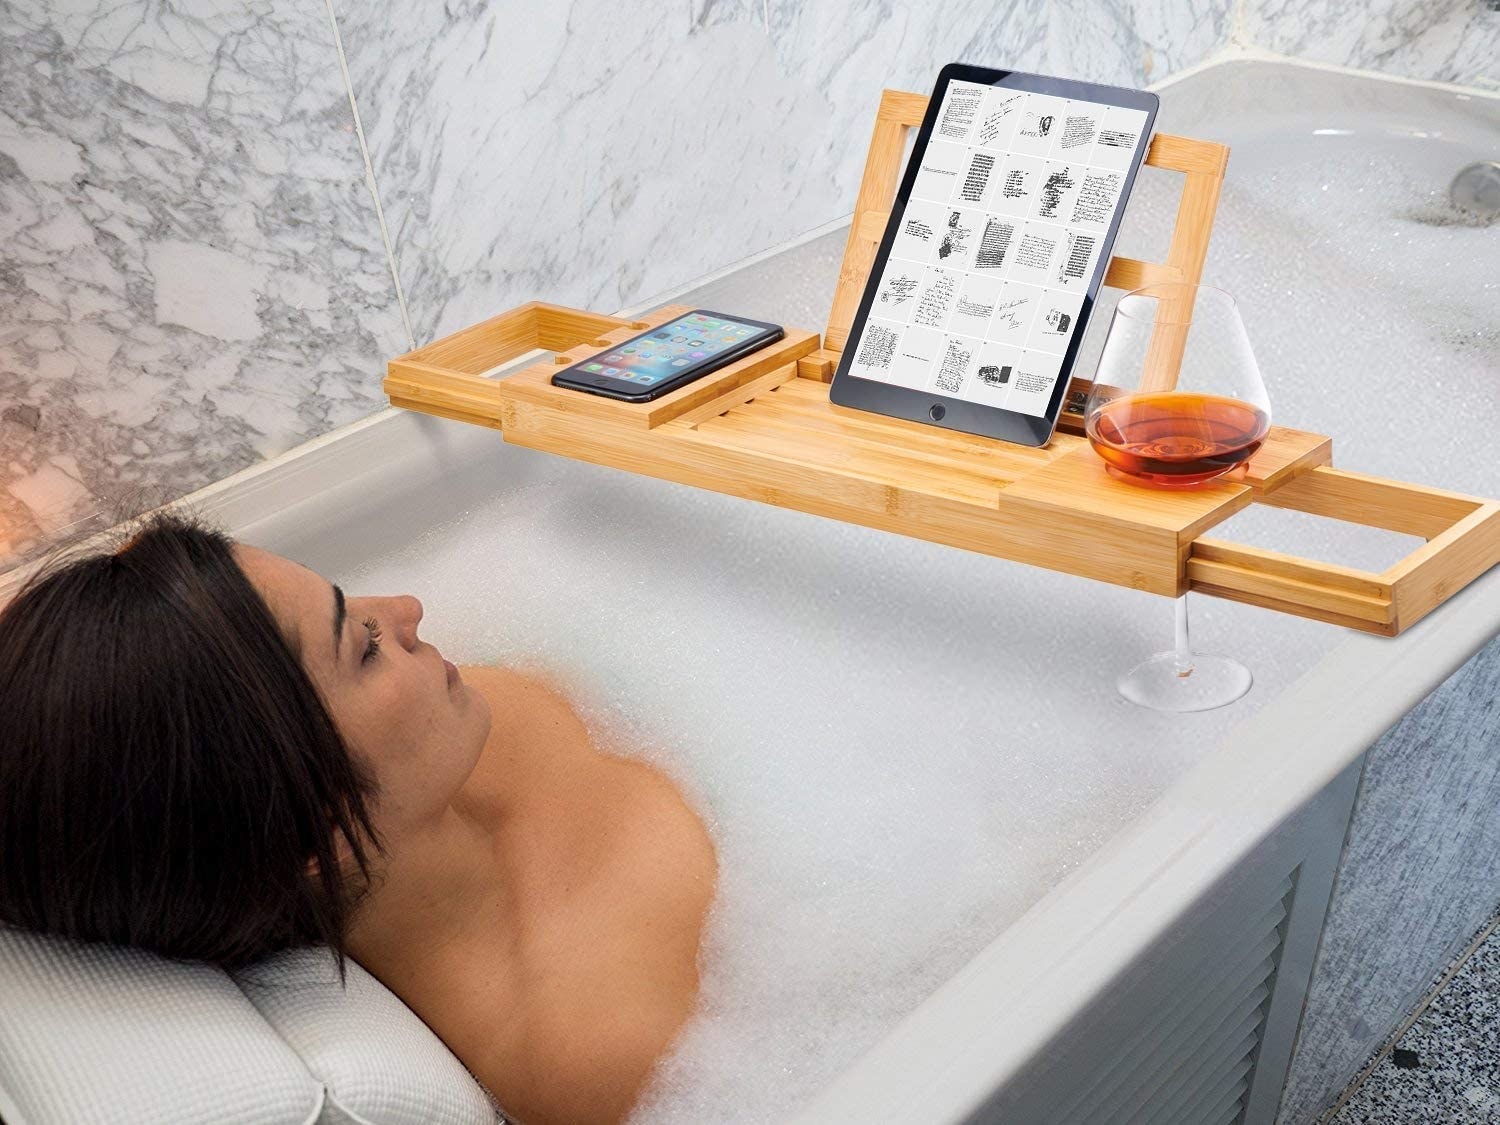 a person relaxing in the tub while watching a show on the tablet perched on their tub caddy